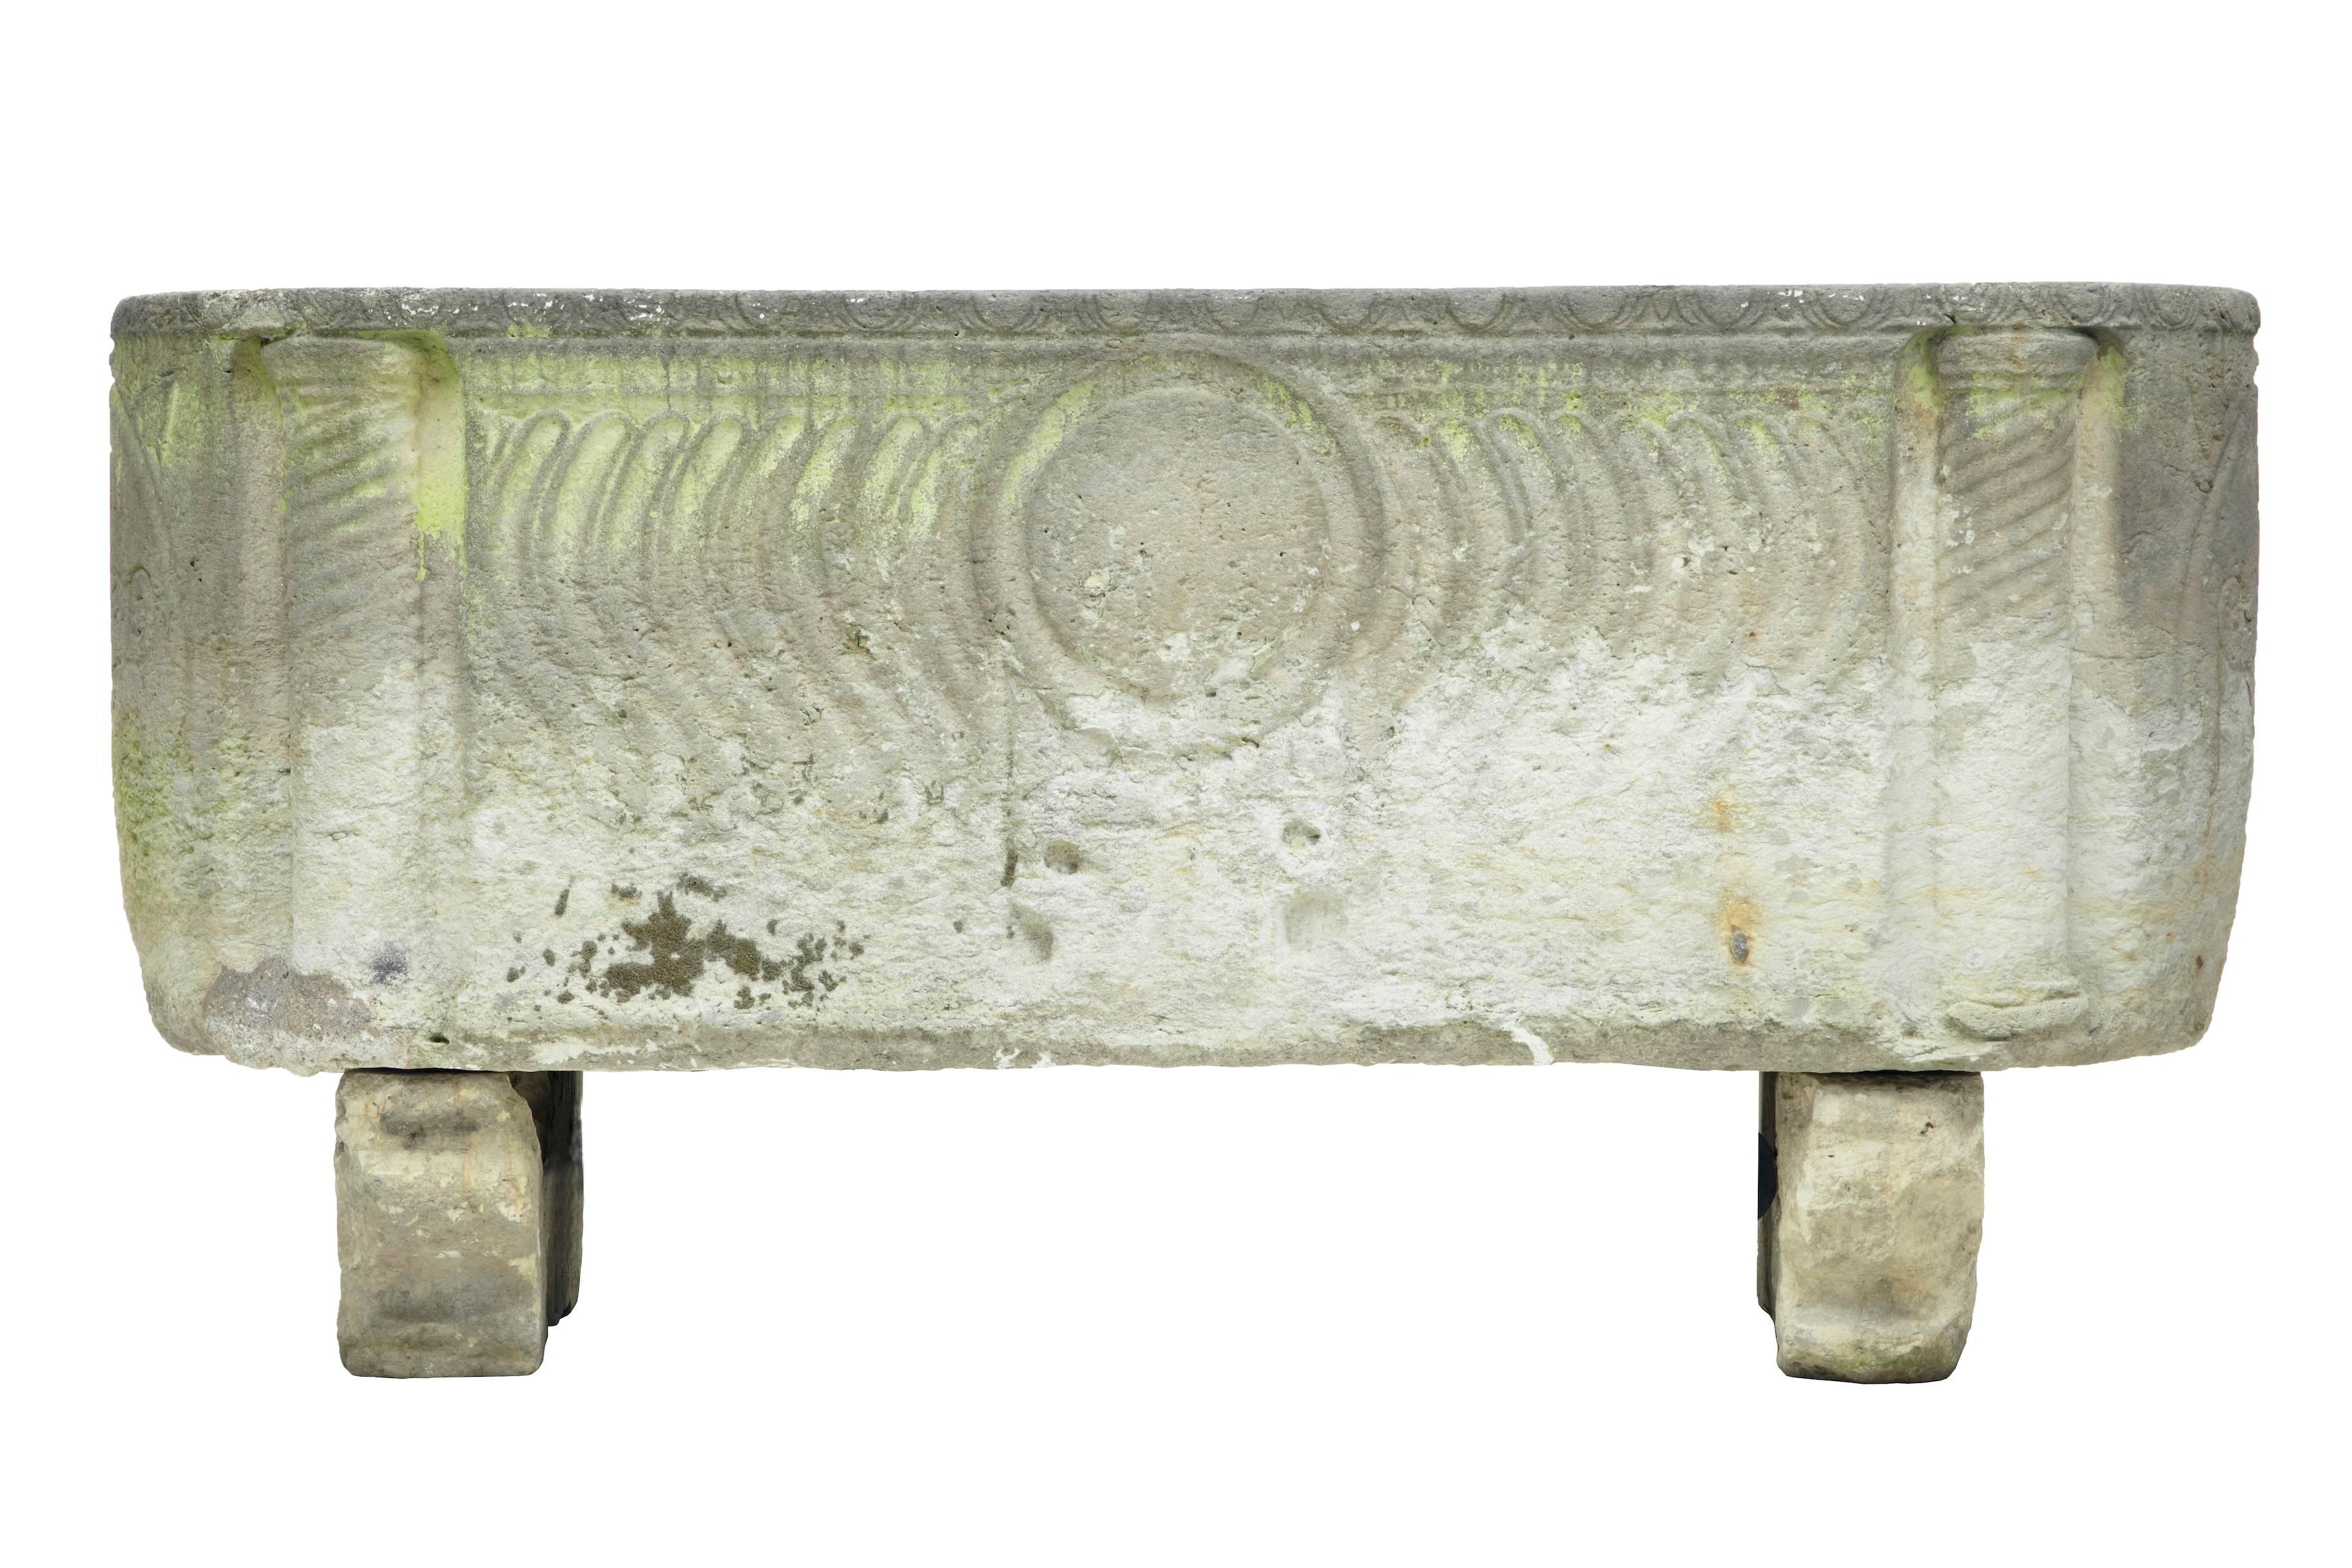 A stunning Anglo Roman sarcophagus in limestone, sitting on sledge feet and having curved
strigilated side carvings with warrior shield and two crossed arrow symbols at each end.
This unique piece was discovered in a Copenhagen garden. Although